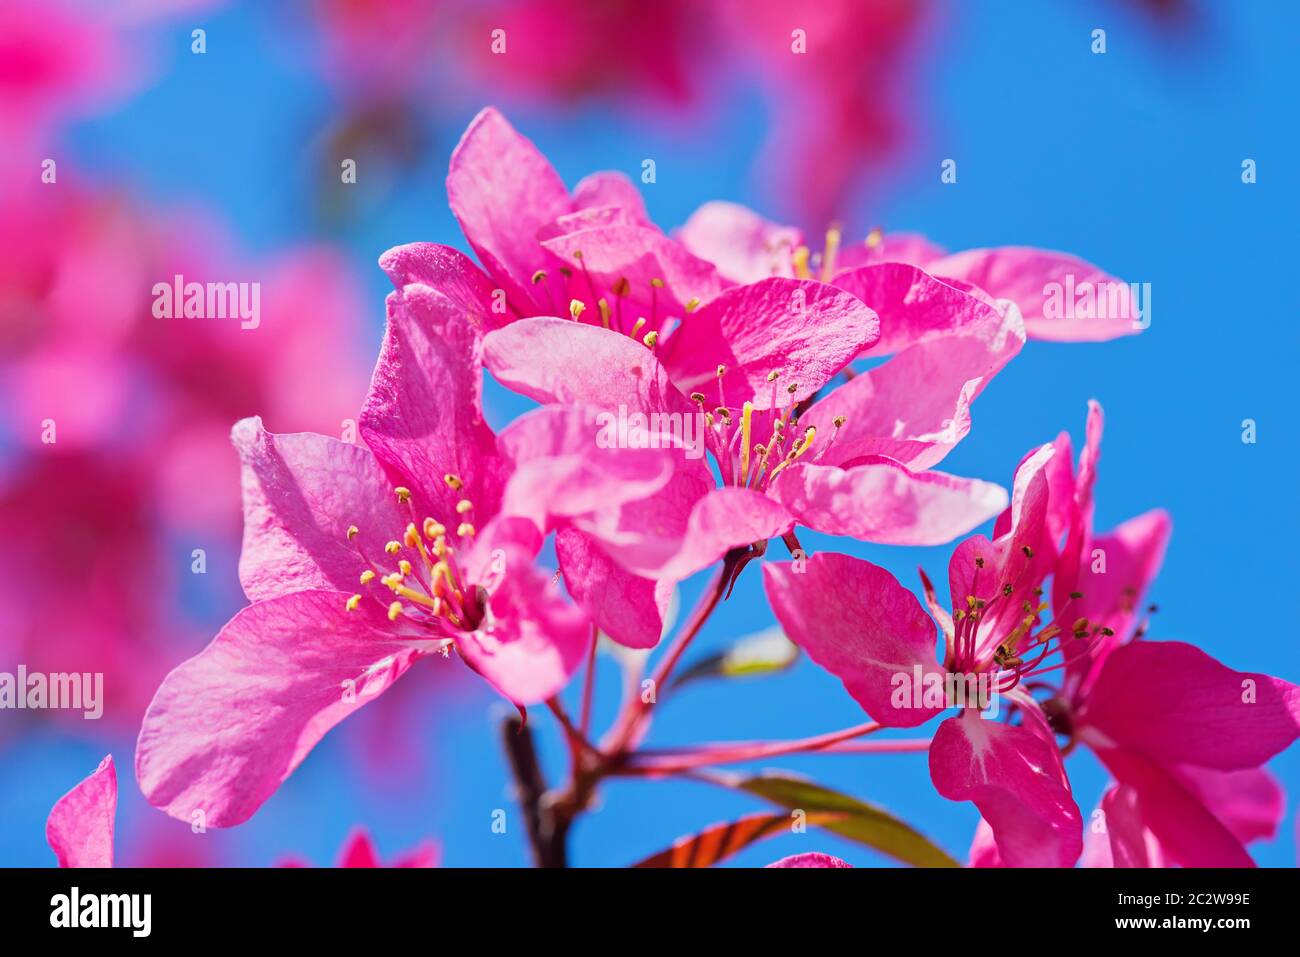 Pink flowers on the decorative apple bush over blurred background. Shallow depth of field. Stock Photo